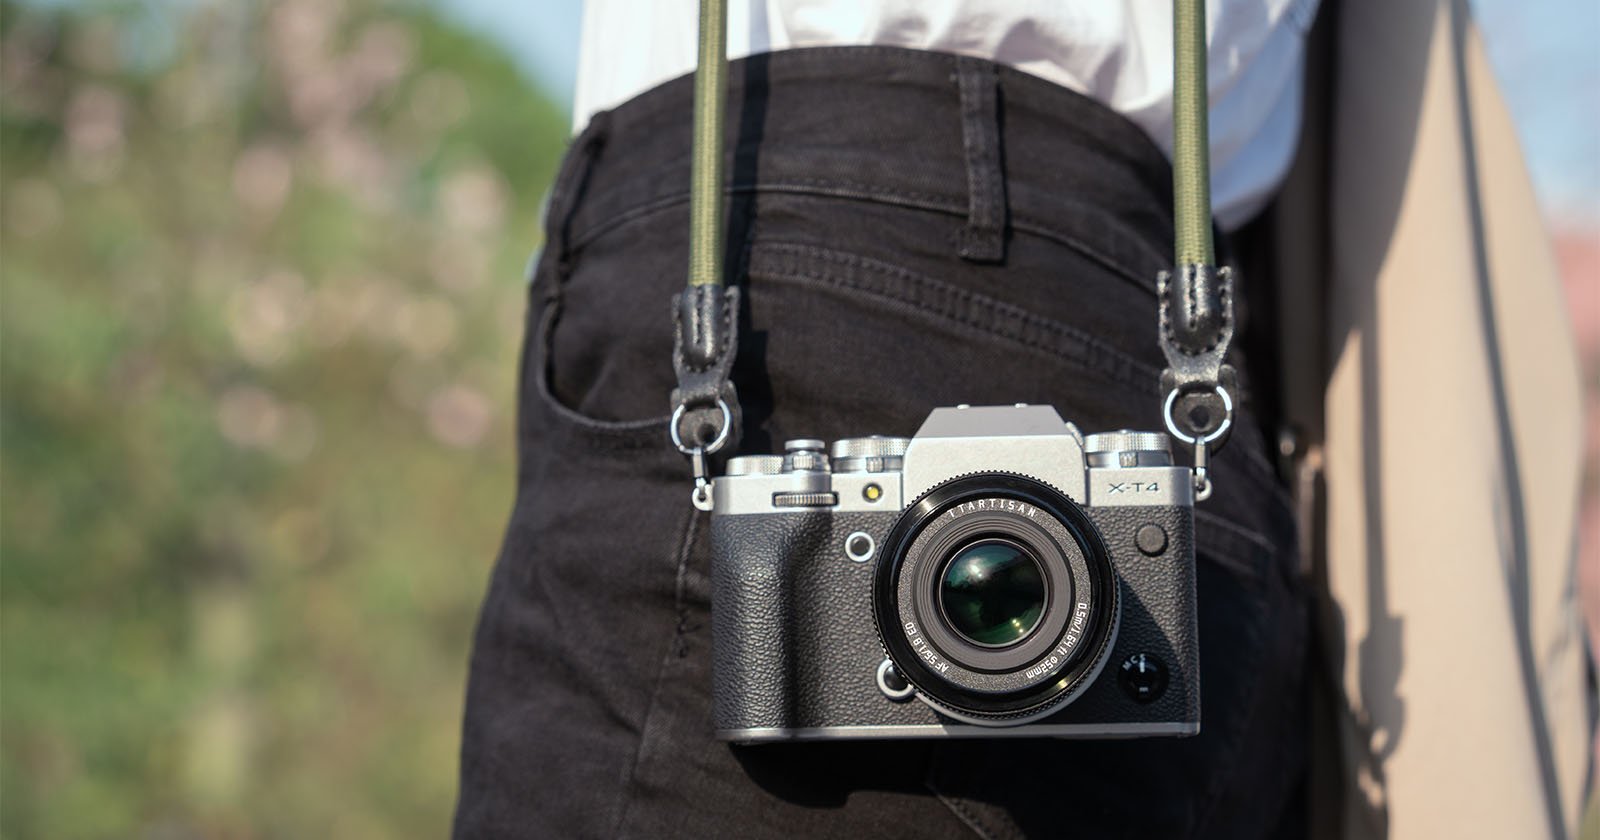 A close-up view of a vintage-style silver mirrorless camera with a black strap, hanging from a person's belt against a blurred natural background.